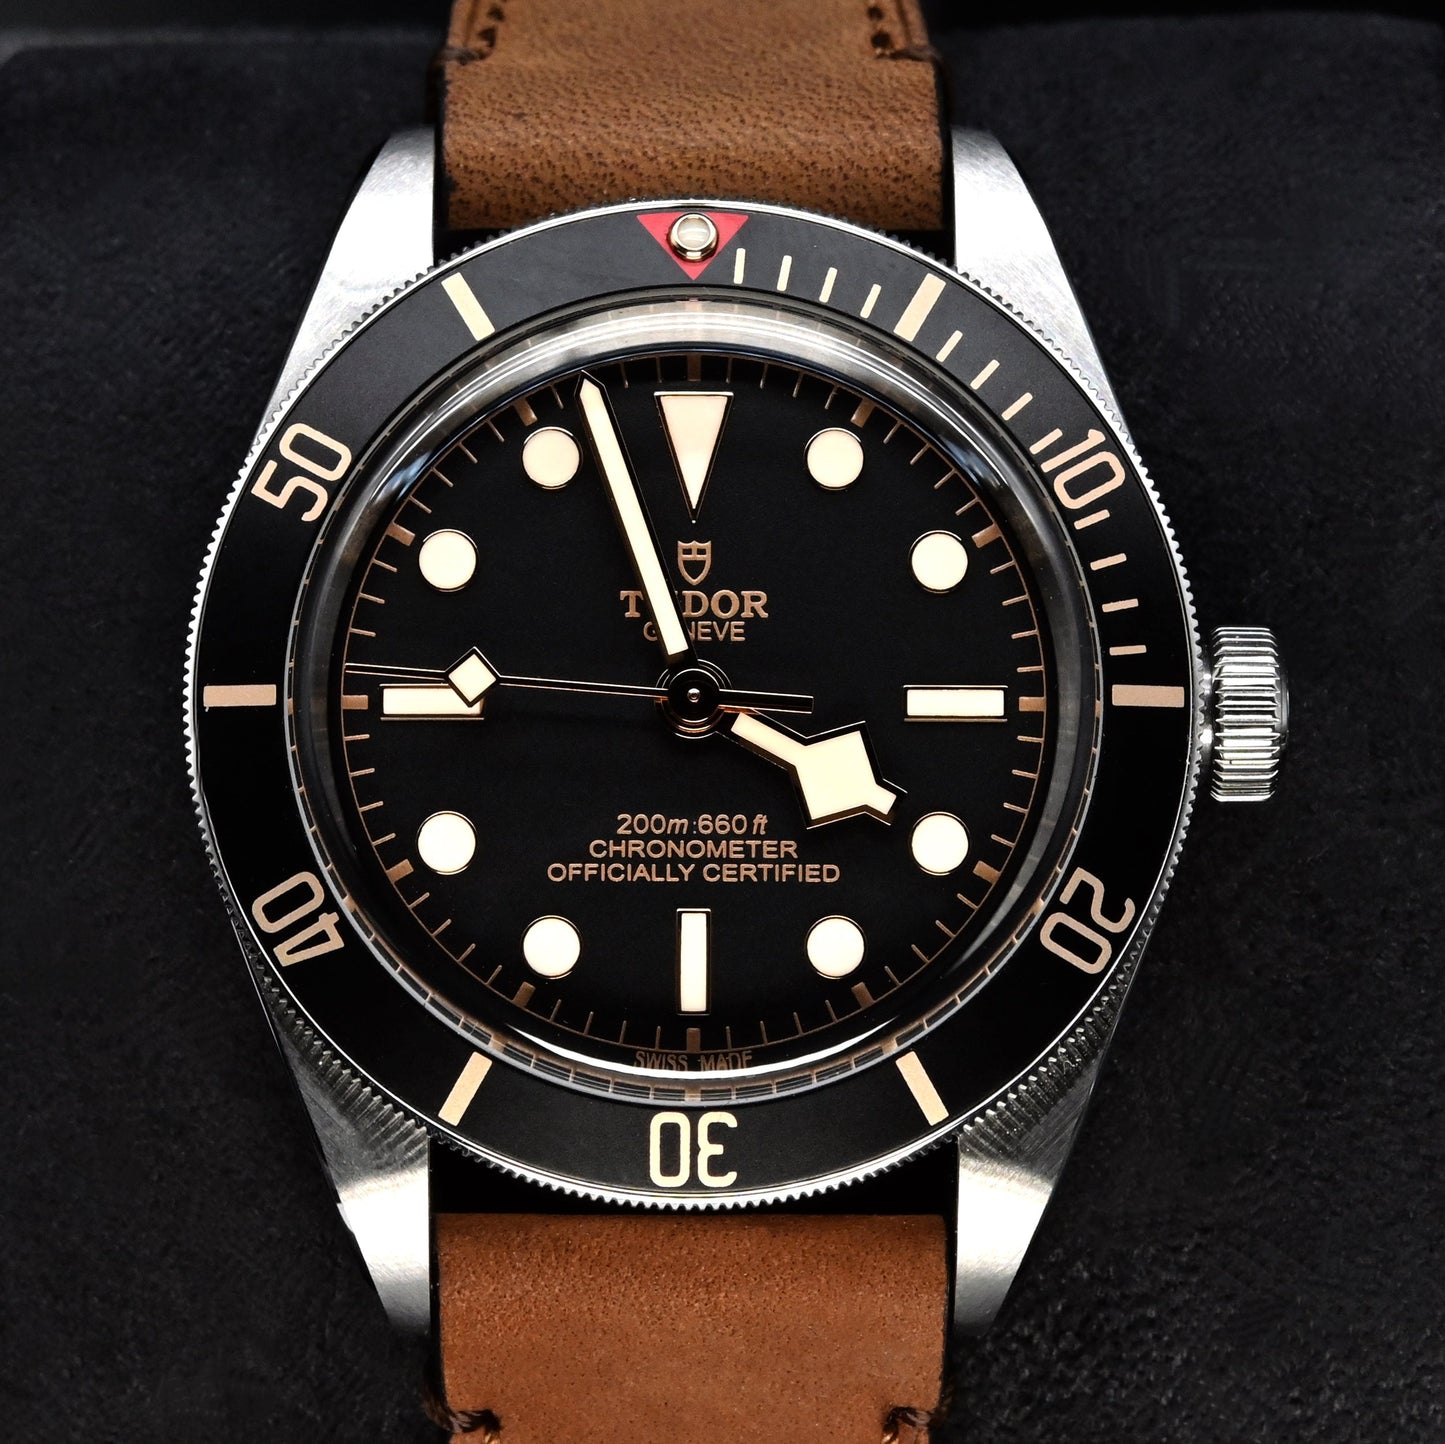 [Pre-Owned Watch] Tudor Black Bay Fifty-Eight 39mm 79030N (Leather Strap)